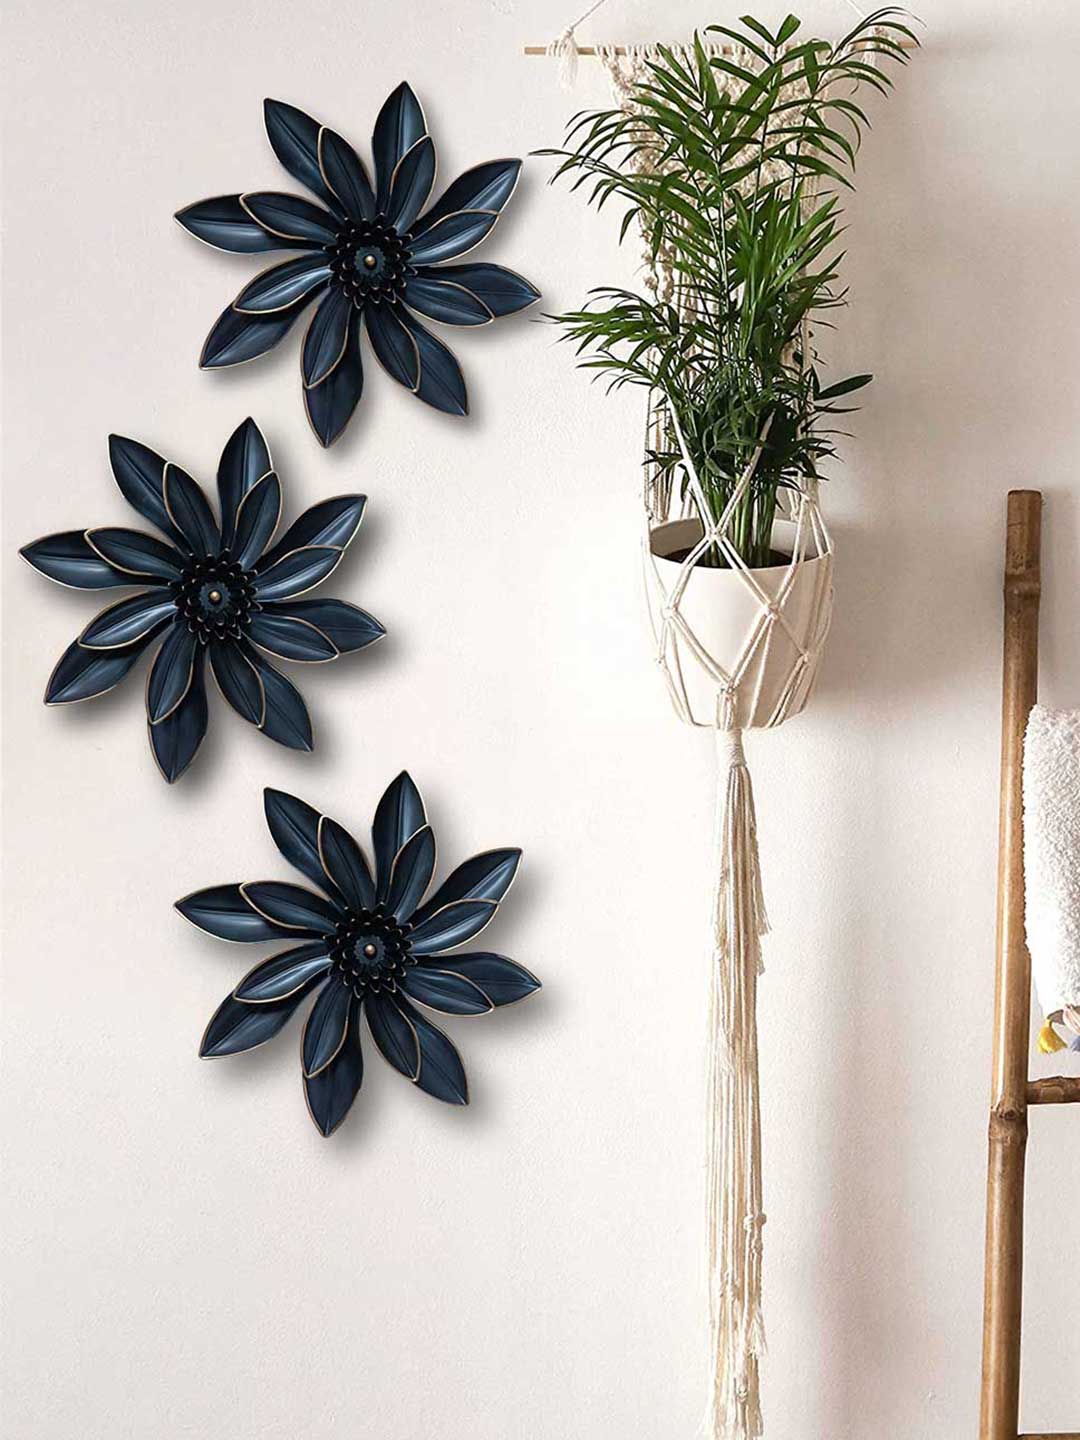 Art Street Pack Of 3 Black Floral Shaped Plastic Wall Decor Price in India